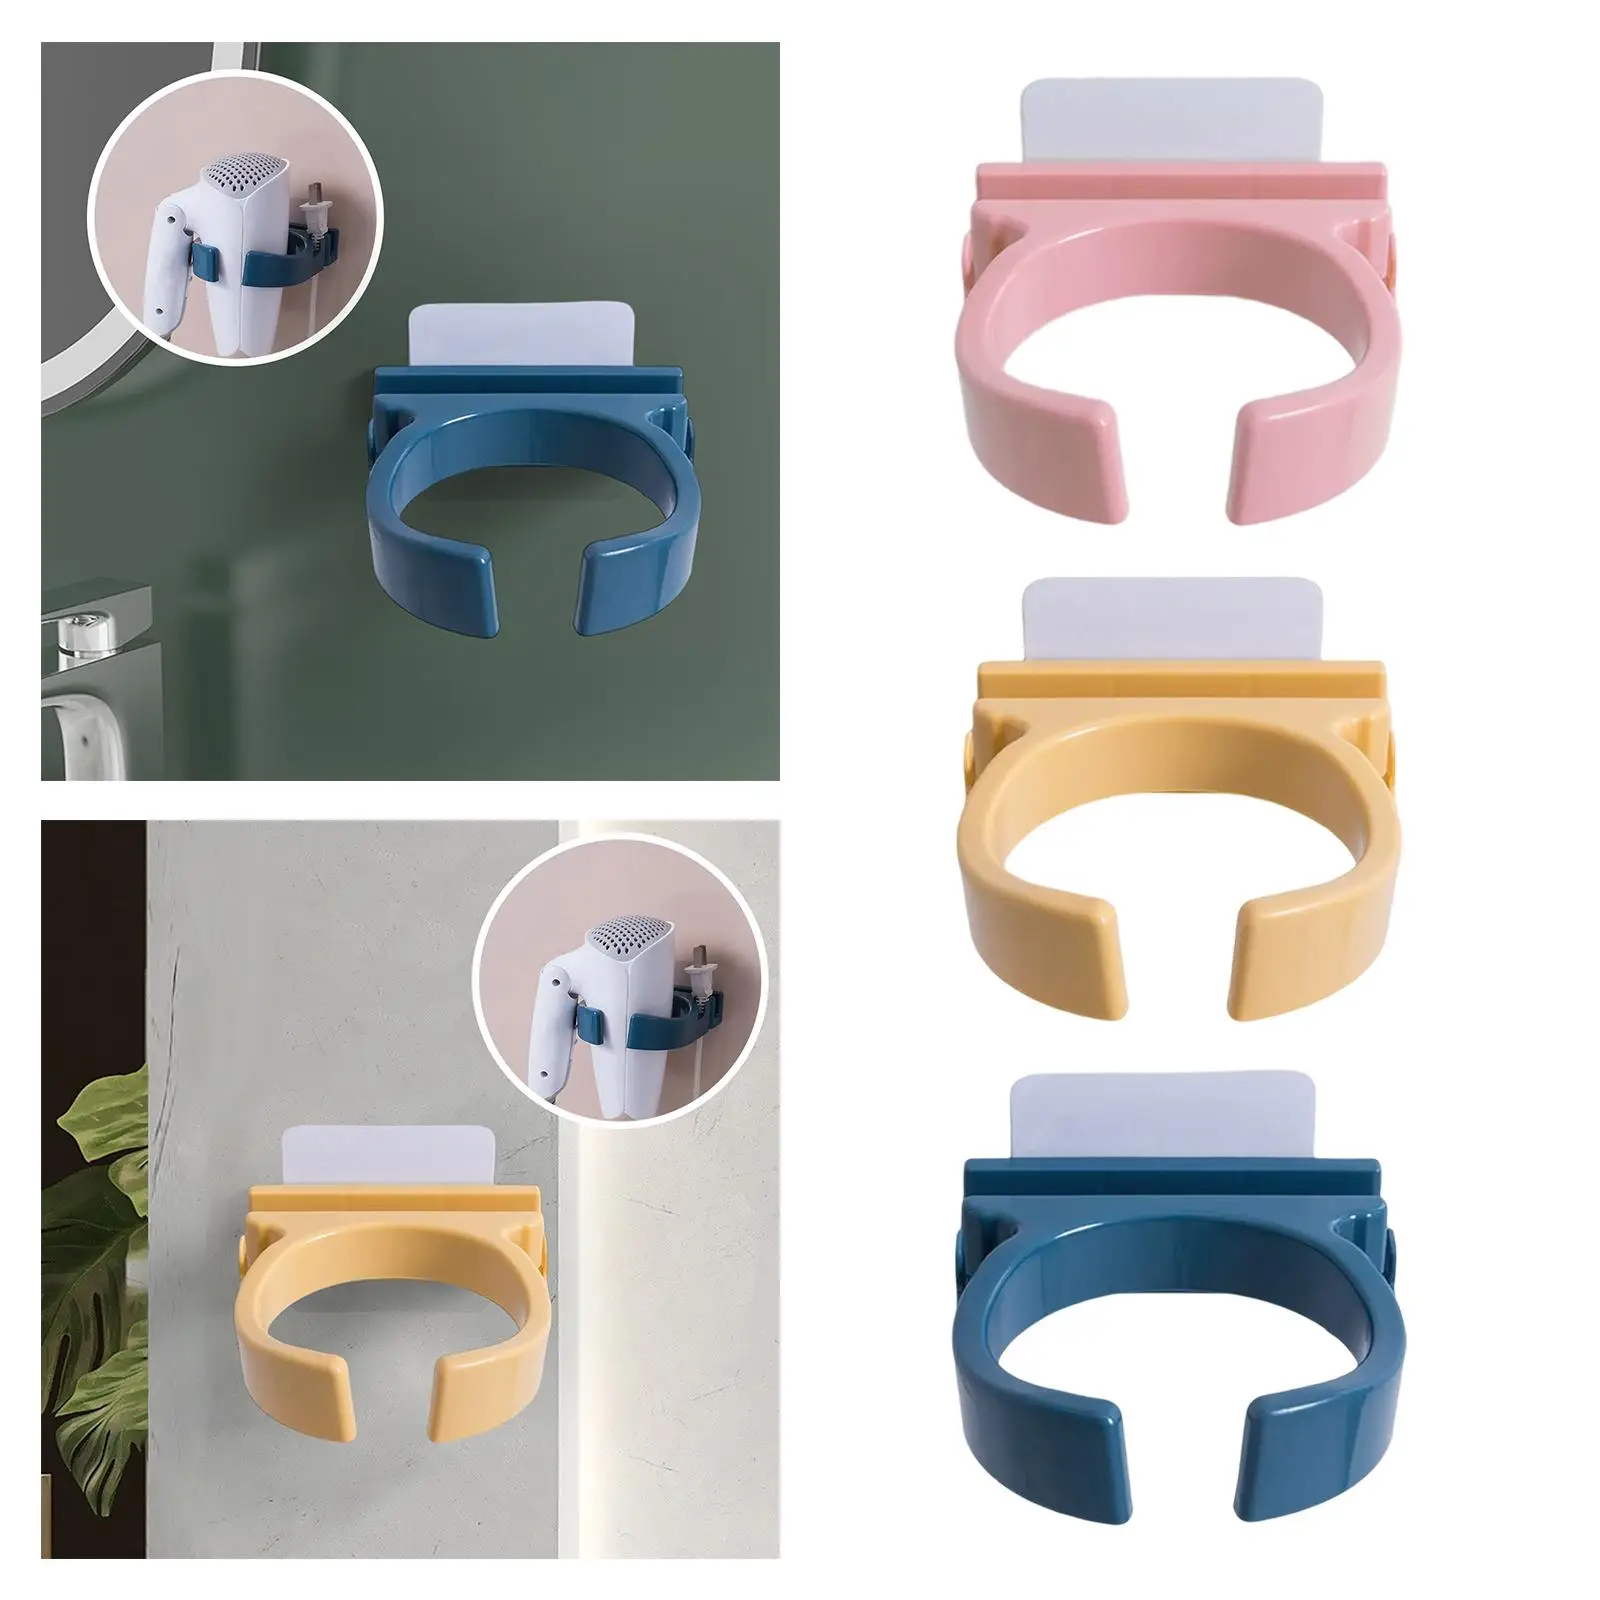 Punch Free Blow Dryer Holder Self Adhesive Wear Resistant ABS Wall Mounted Durable Shelf Rack Stand for Home Hotel Washroom